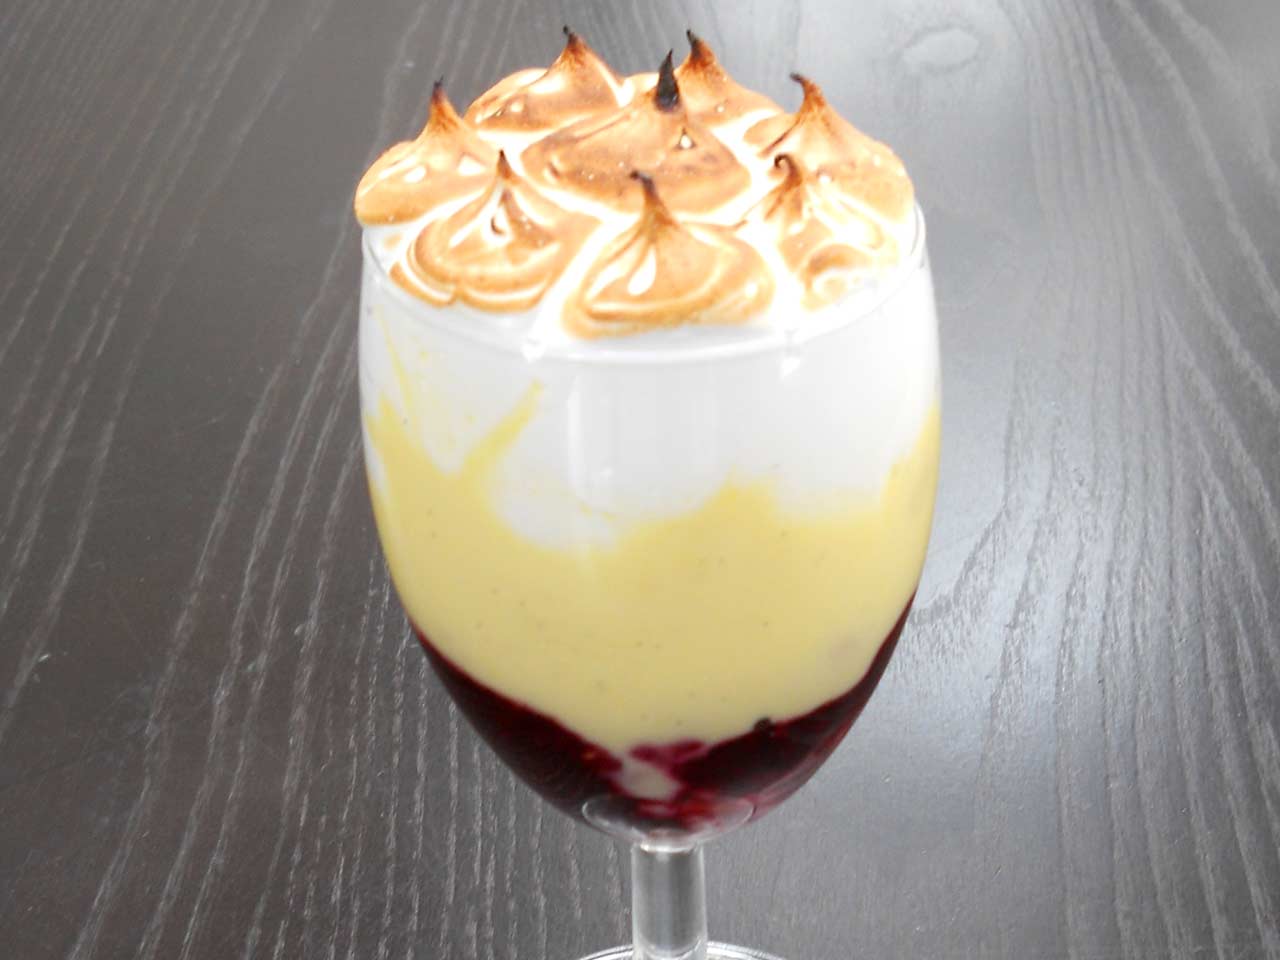 Queen of Puddings, a deliciously decadent trifle with a meringue topping